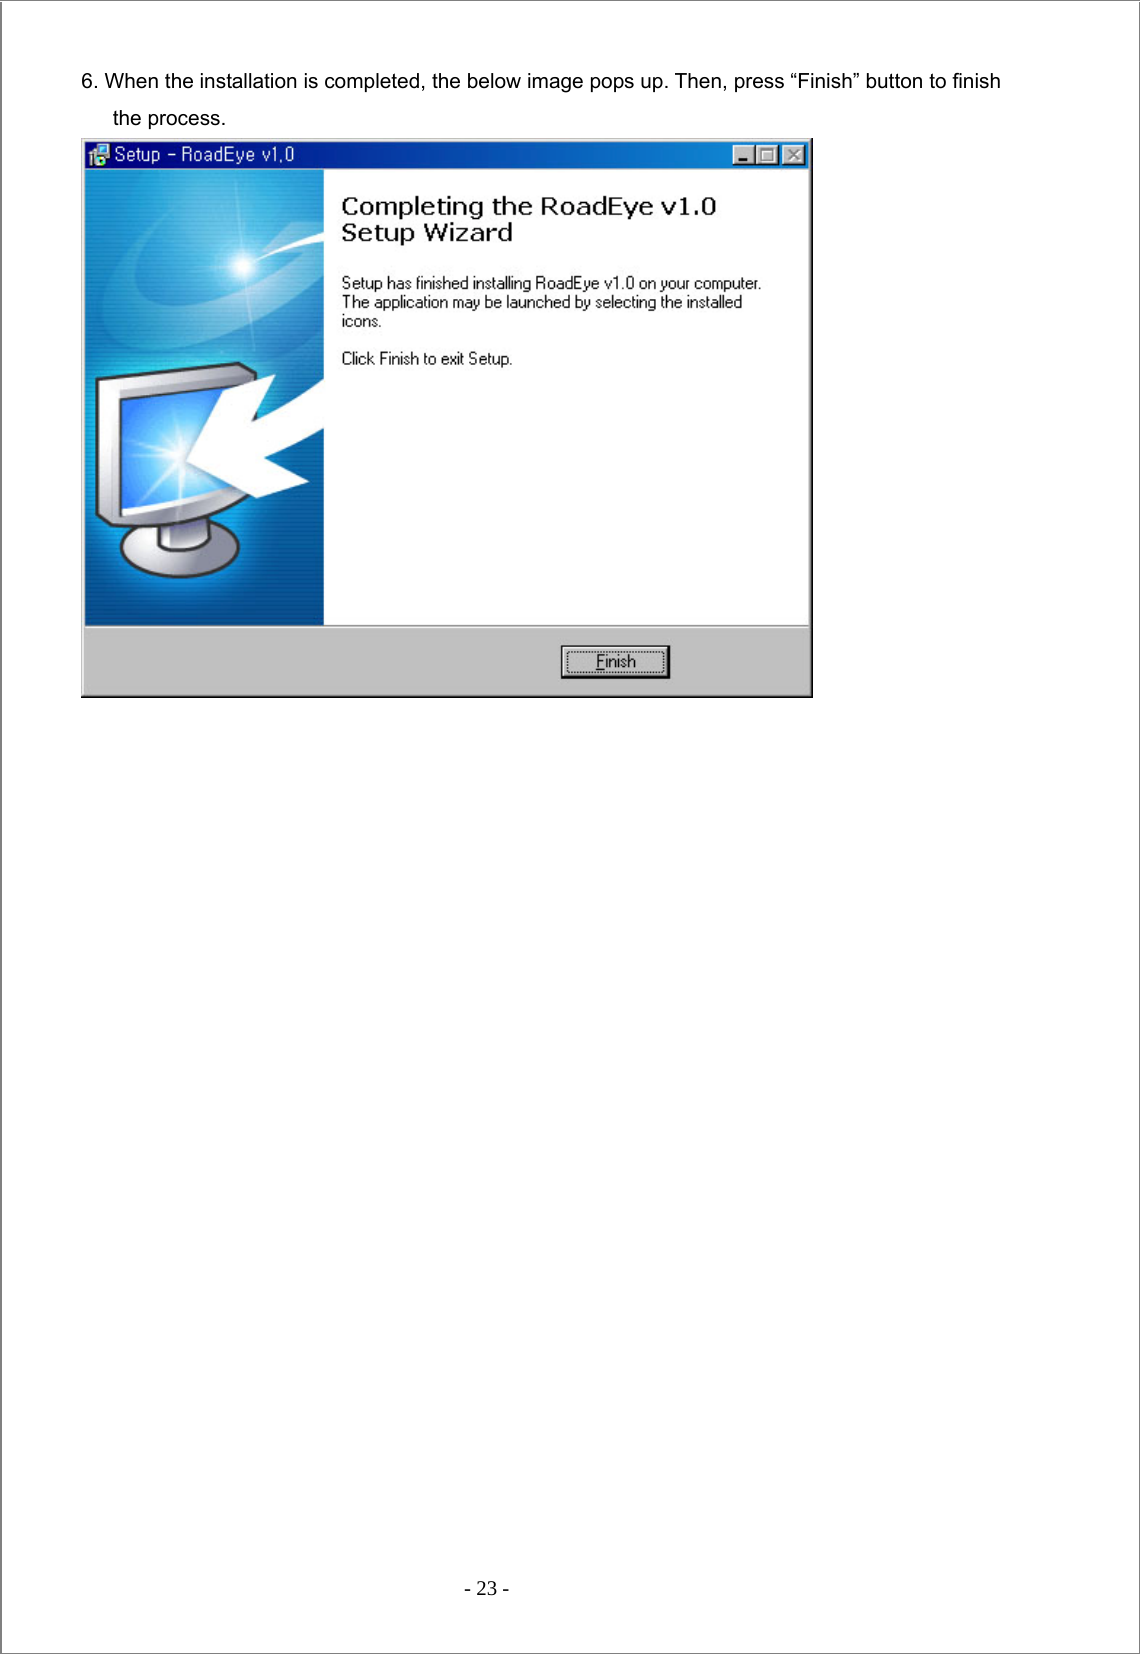  - 23 -  6. When the installation is completed, the below image pops up. Then, press “Finish” button to finish  the process.   